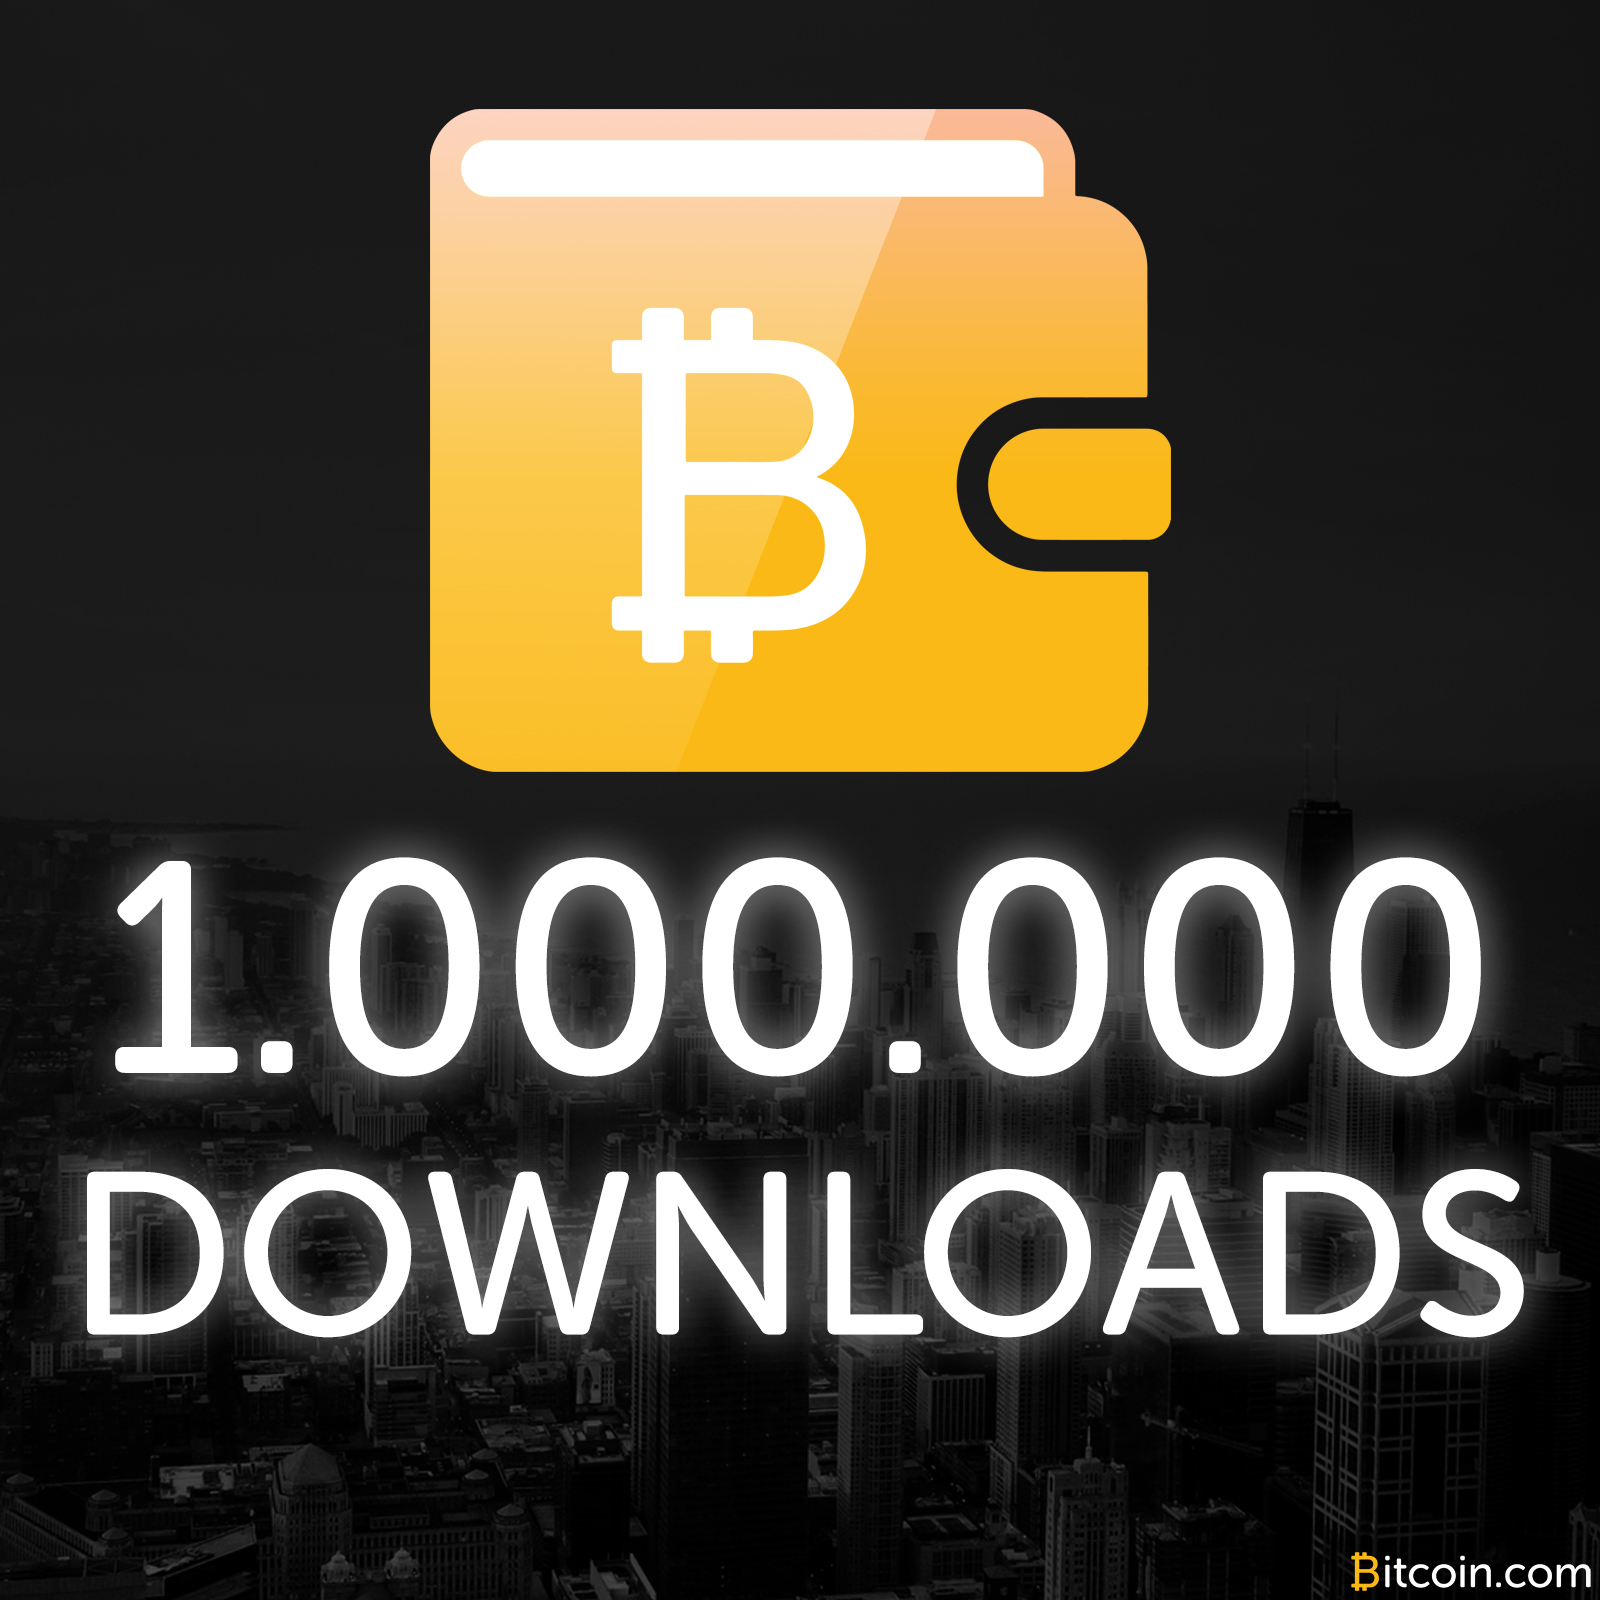 The Bitcoin.com Wallet Celebrates a Million Downloads This Week